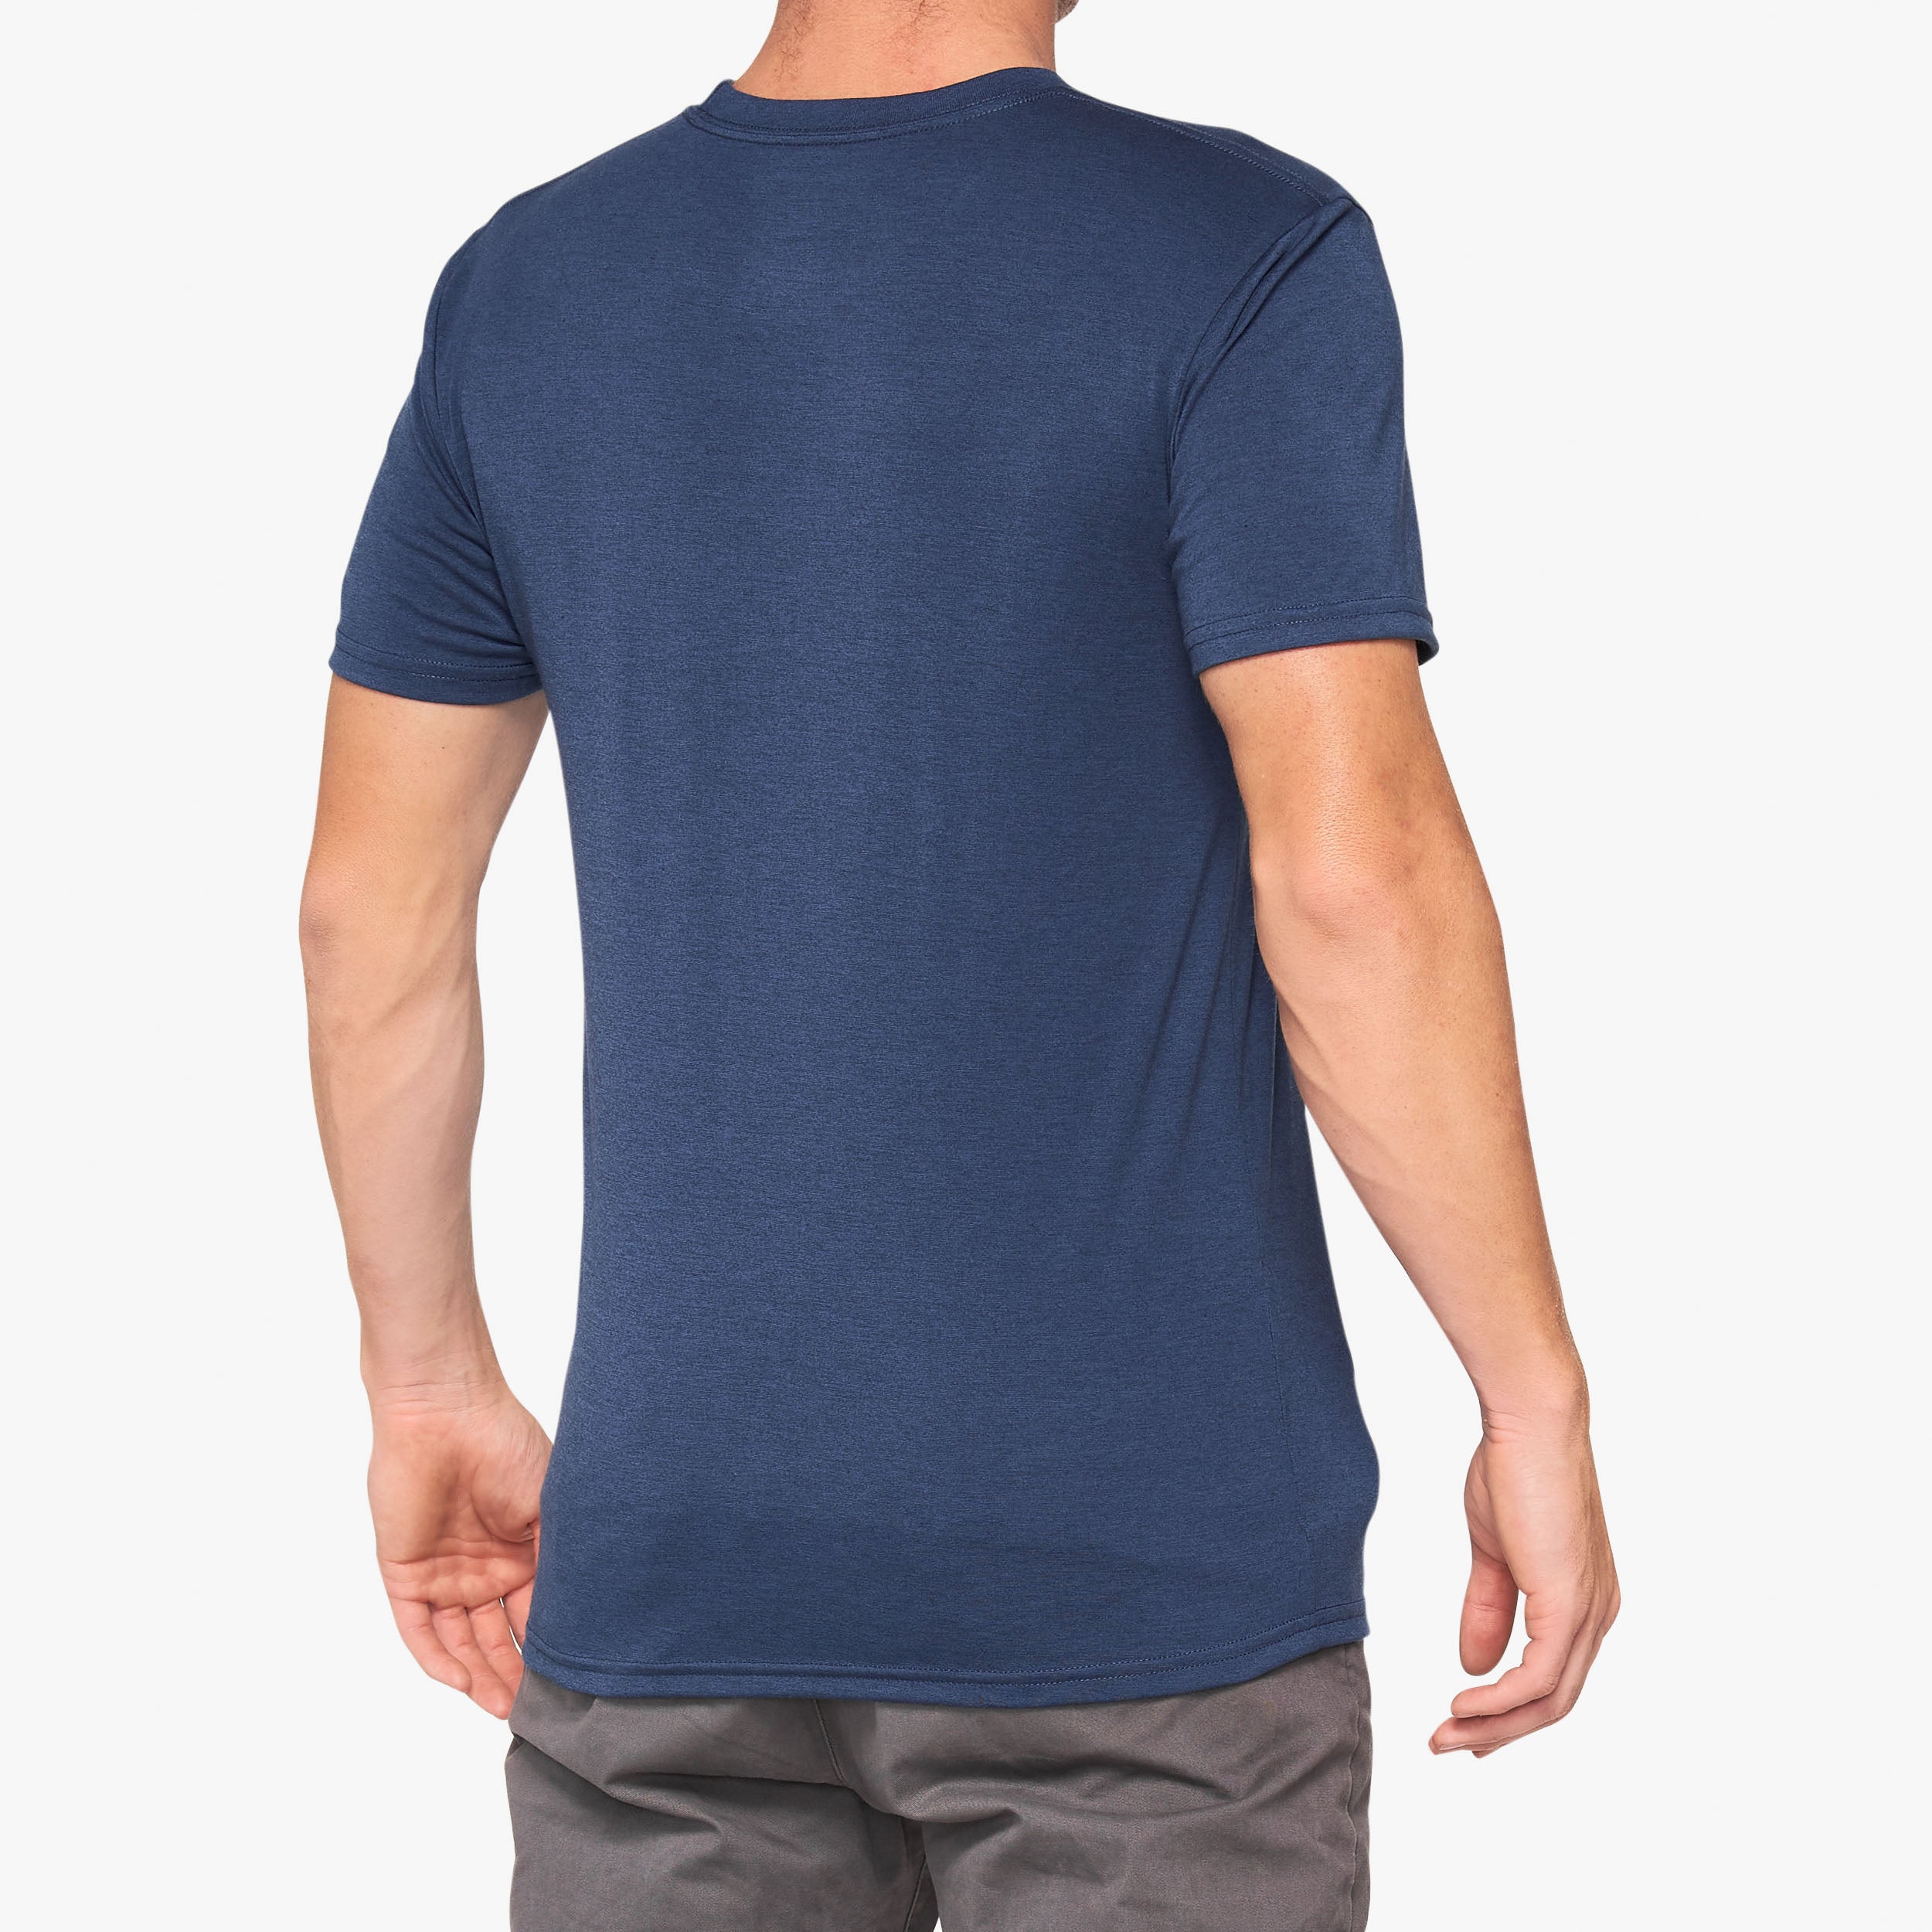 CROPPED Tech Tee Navy - Secondary